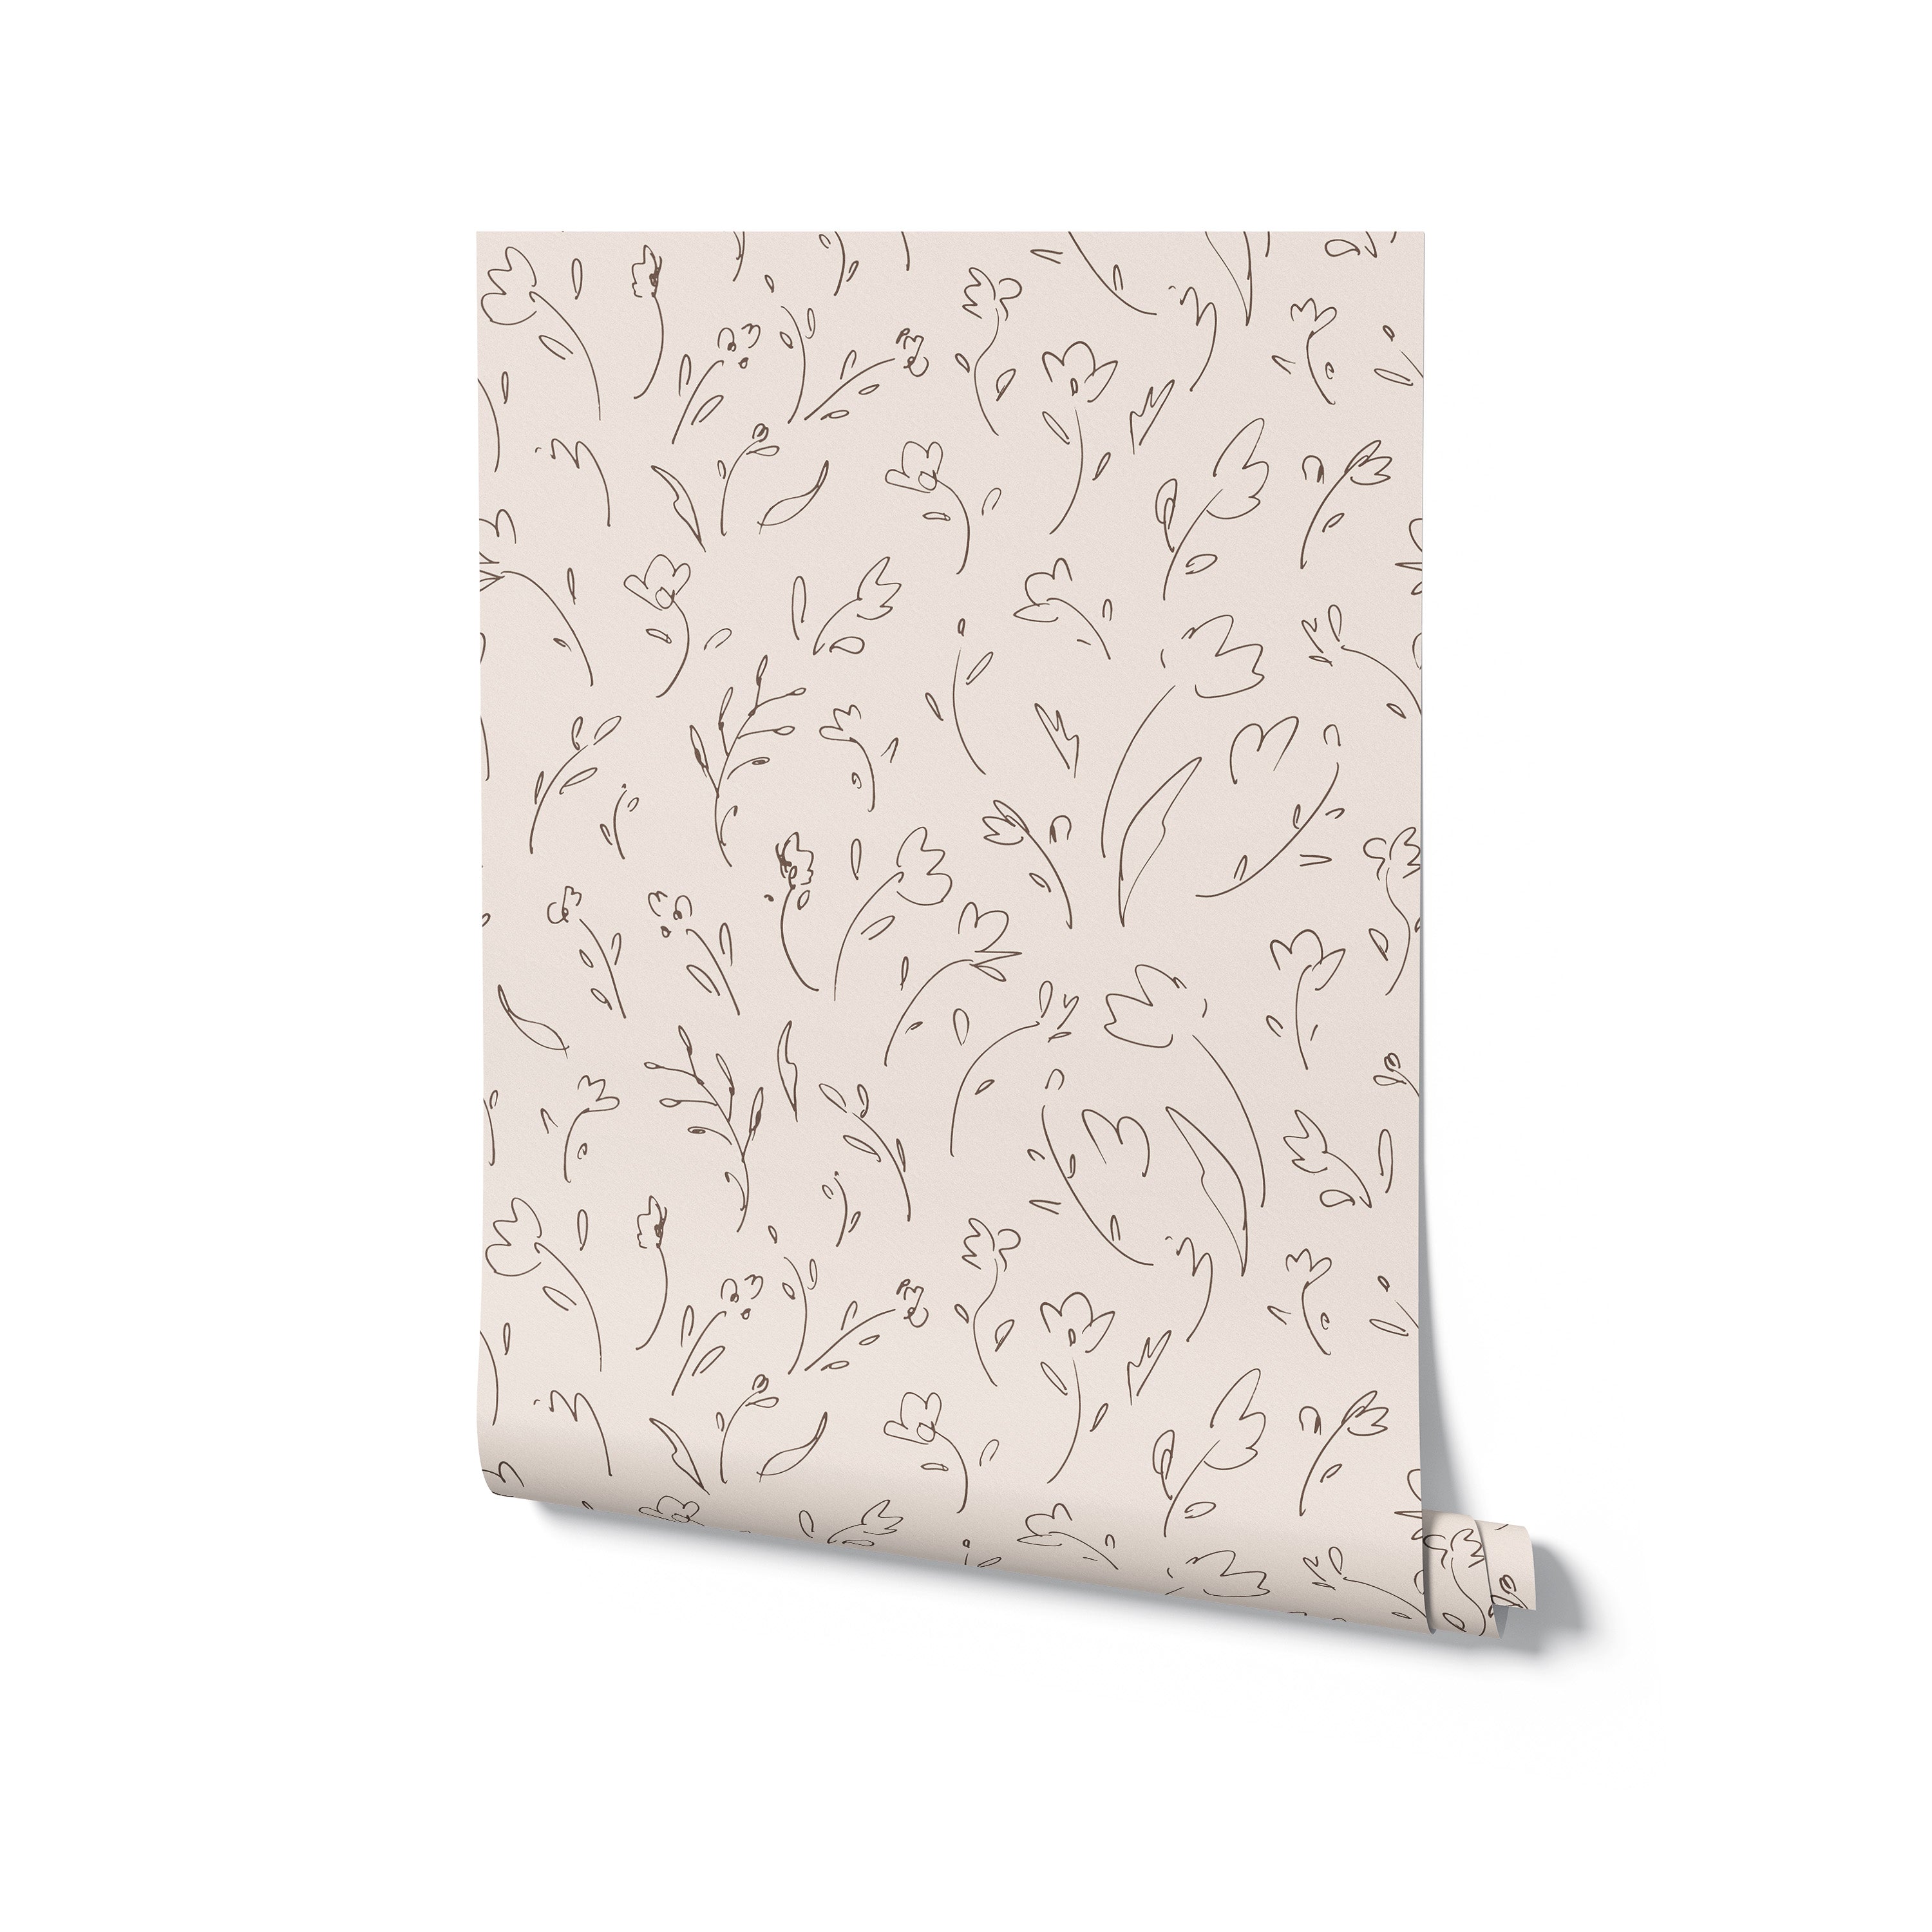 A roll of elegant floral wallpaper featuring a continuous line drawing of flowers and leaves, suggesting a minimalist yet warm design suitable for a variety of contemporary interiors.